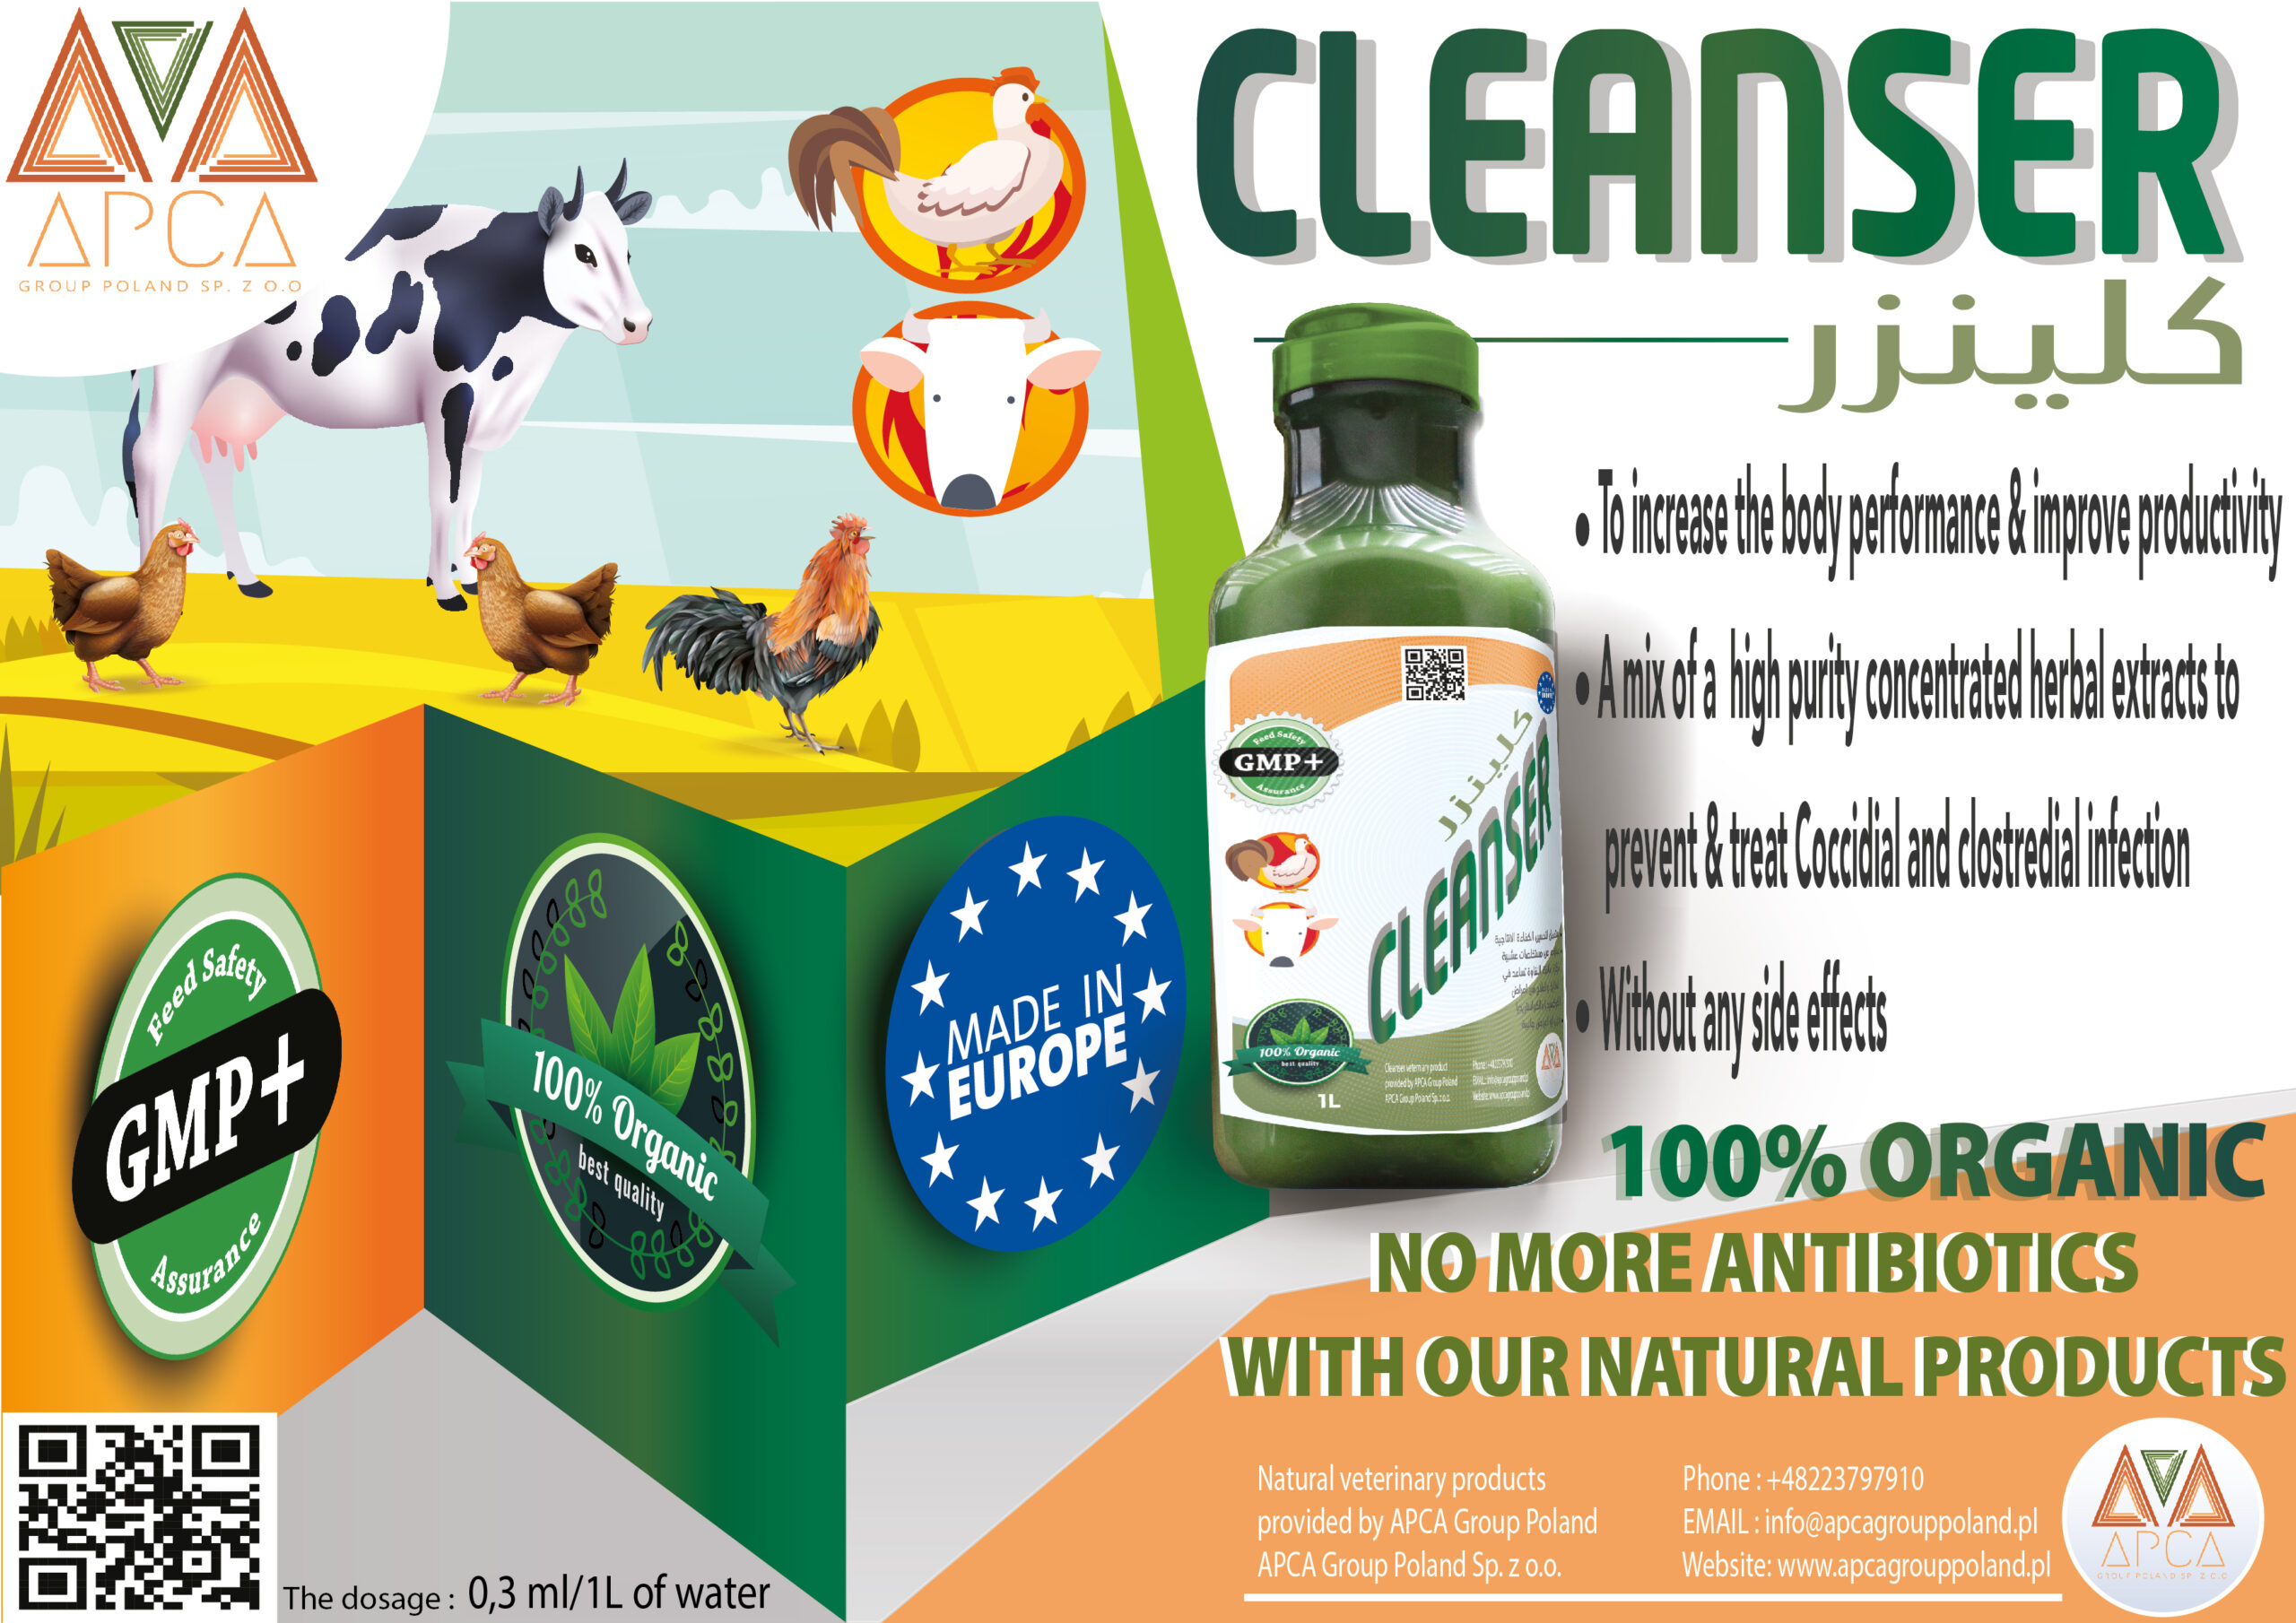 apca group poland -- export veterinary products -- cleanser